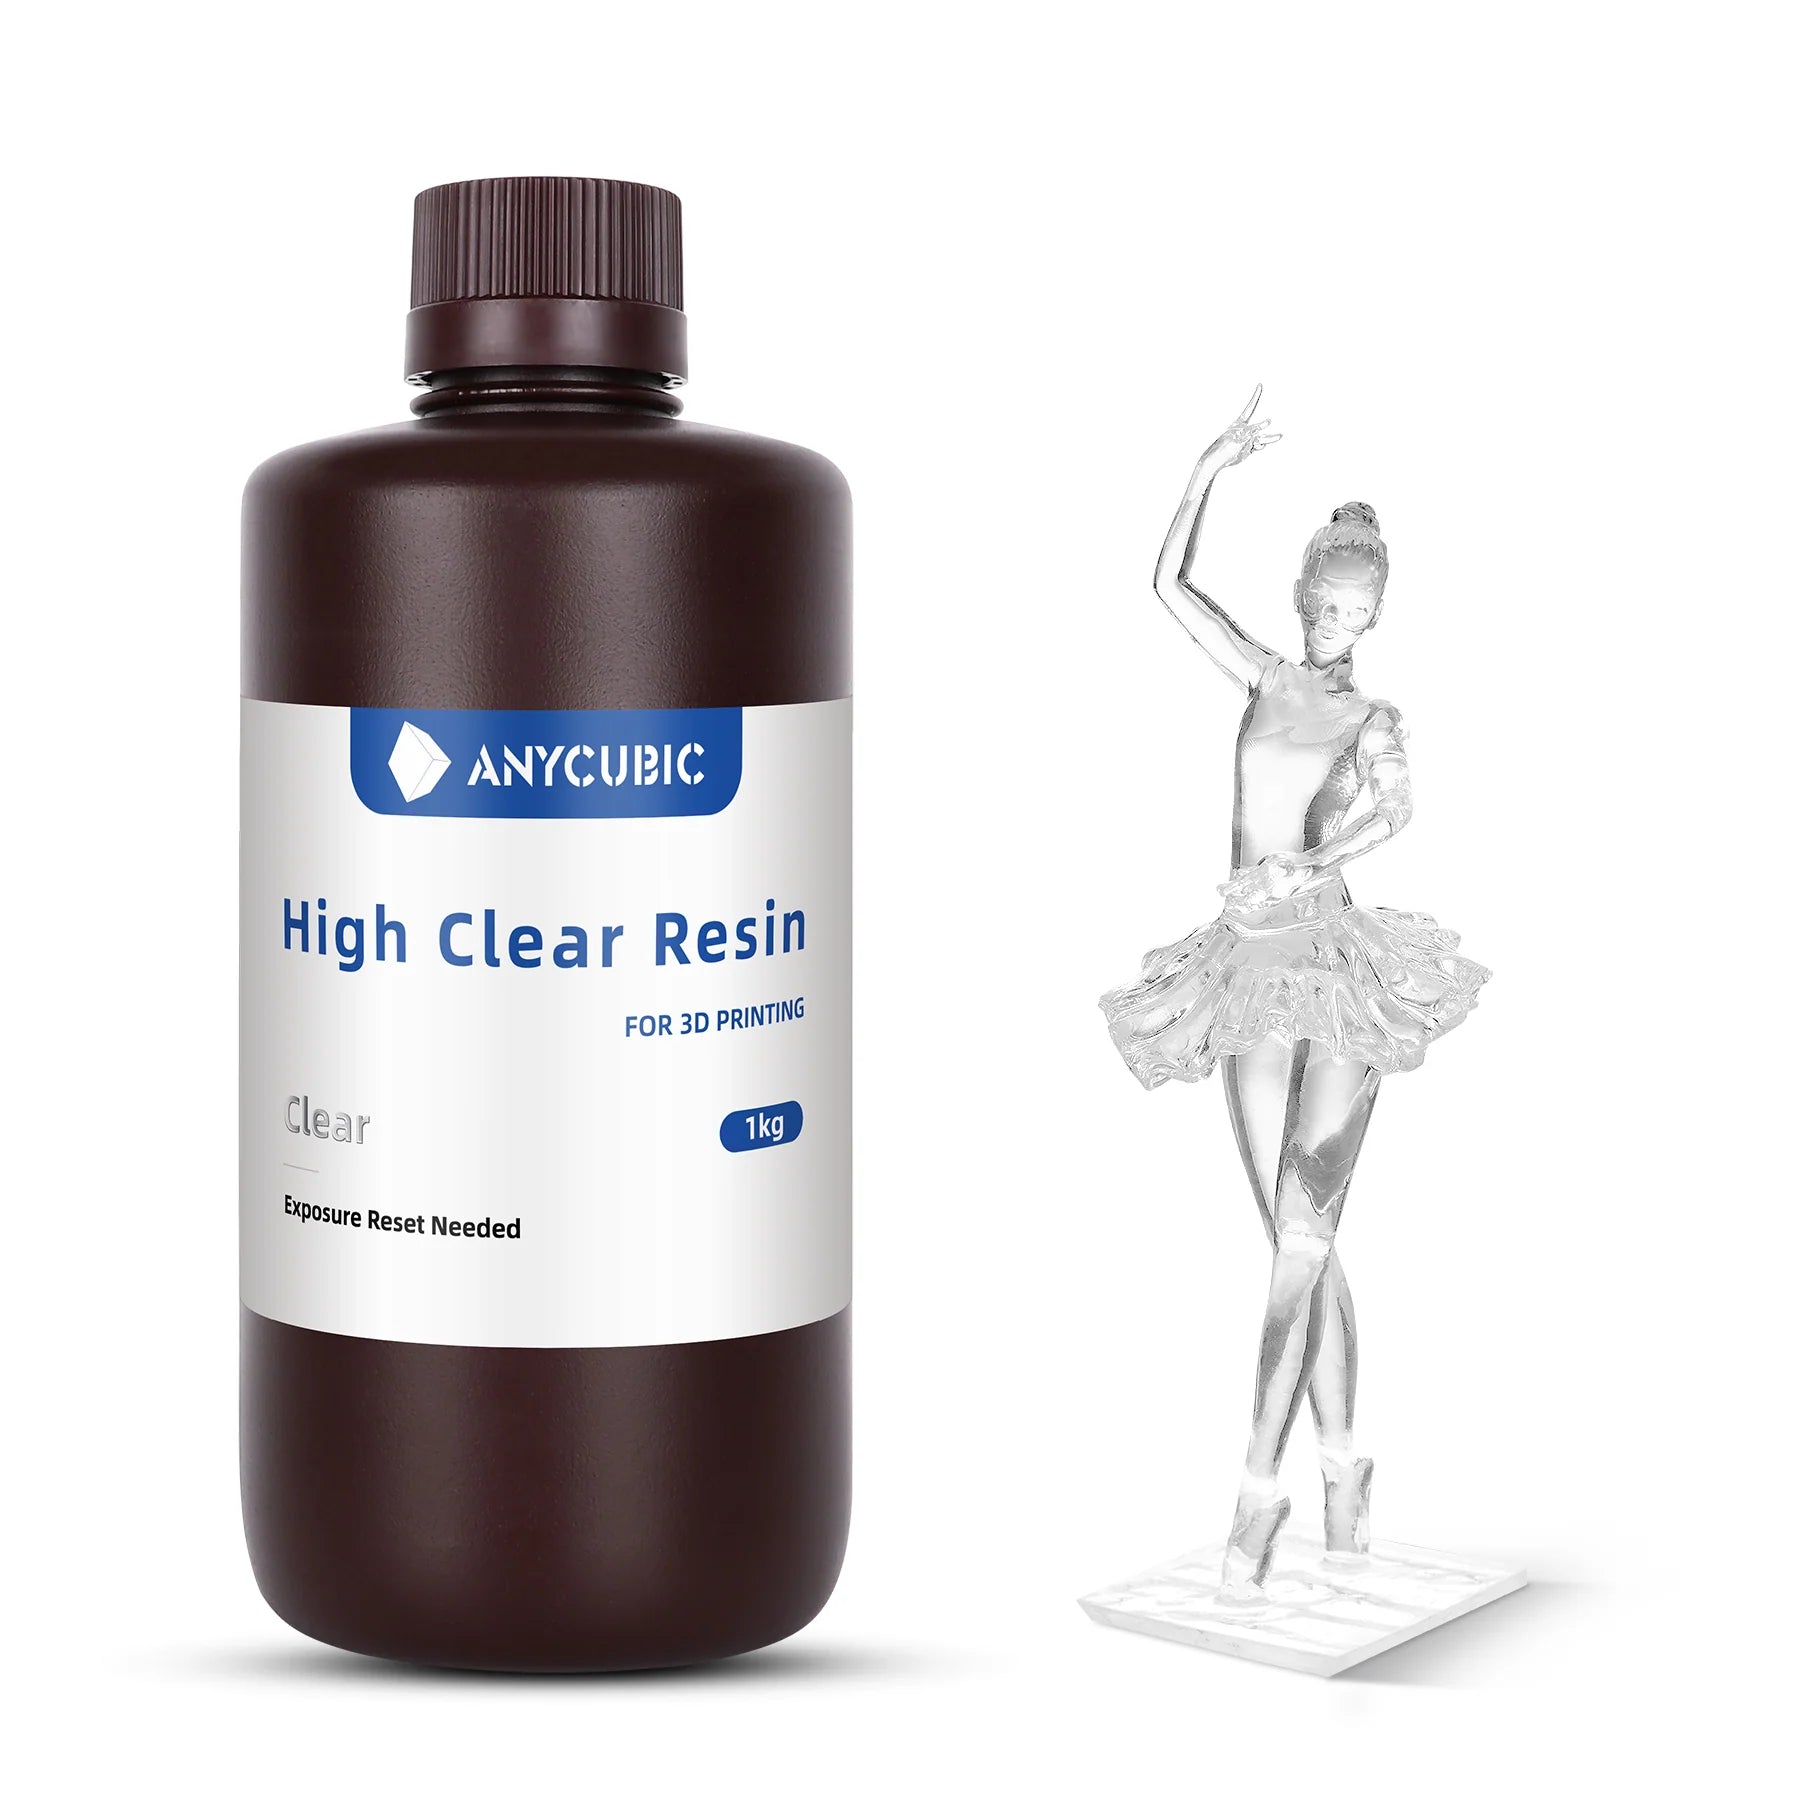 Anycubic High Clear resin 1L